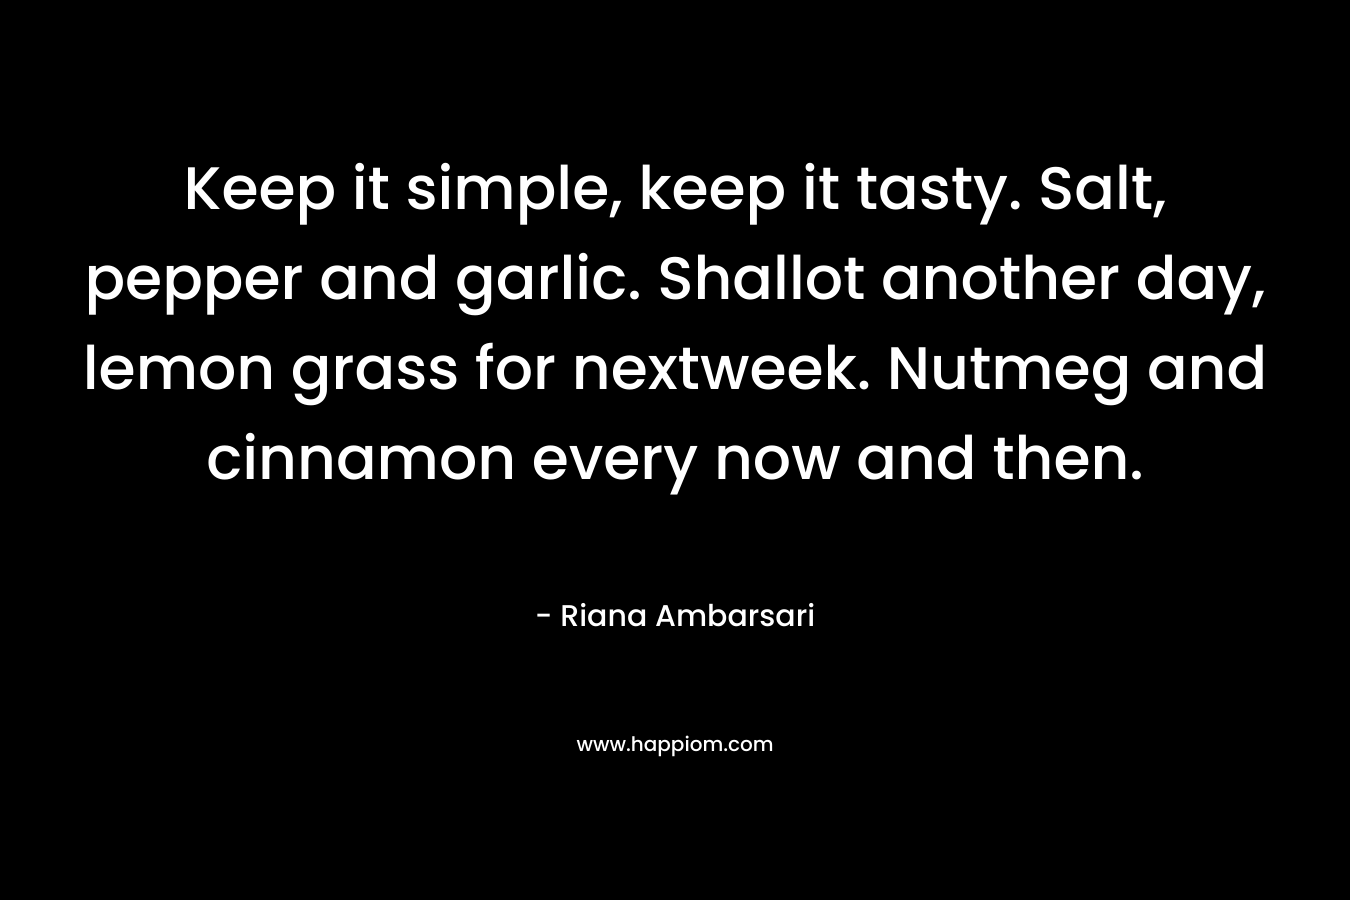 Keep it simple, keep it tasty. Salt, pepper and garlic. Shallot another day, lemon grass for nextweek. Nutmeg and cinnamon every now and then. – Riana Ambarsari